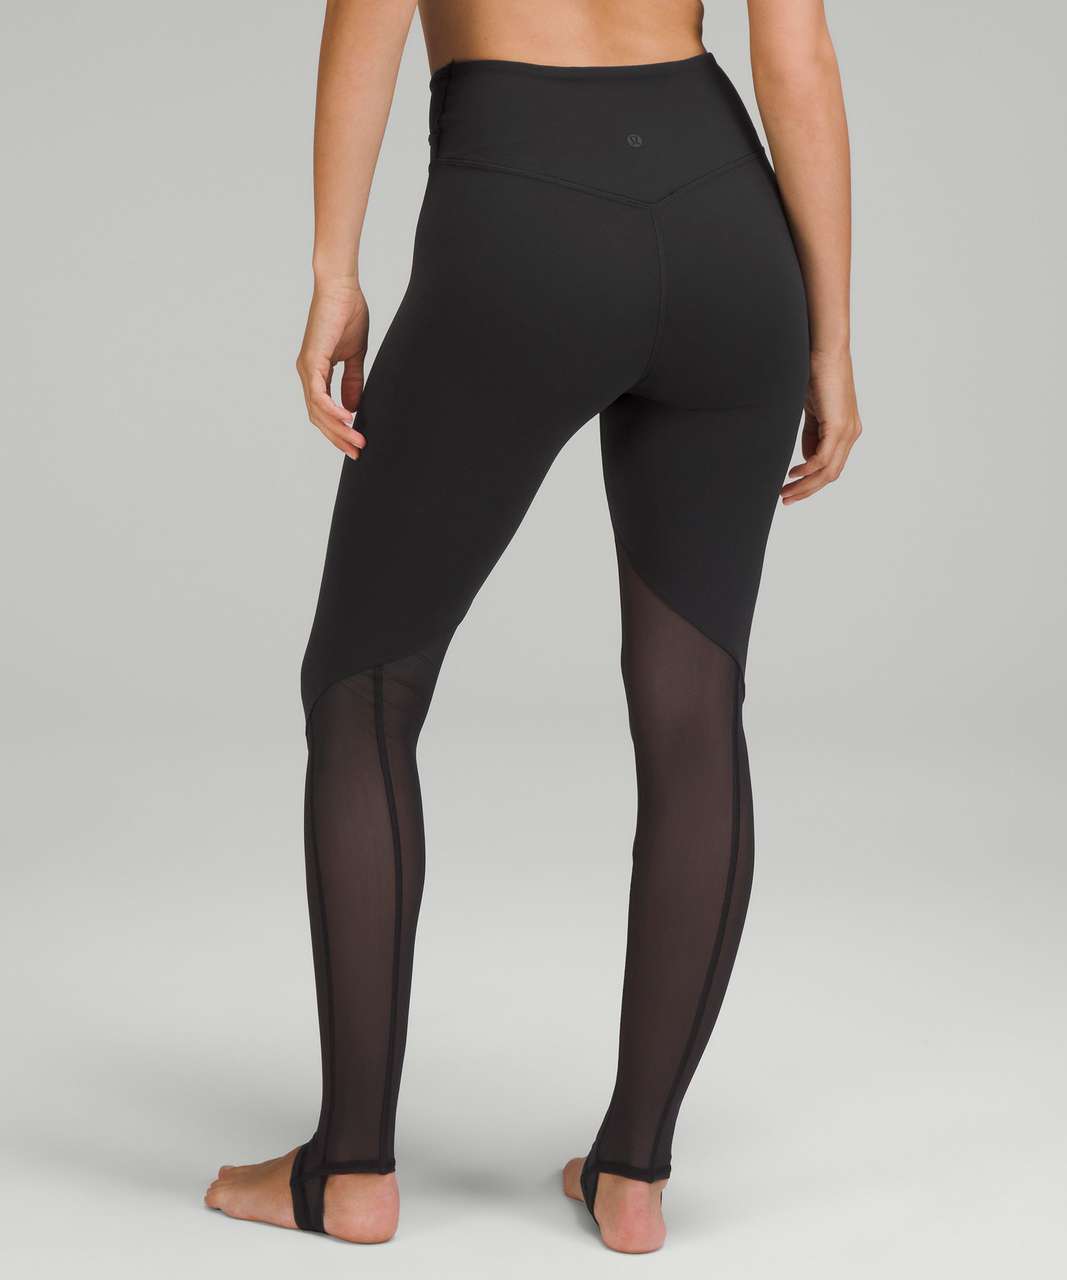 Stylish Criss Cross Workout Leggings with Breathable Mesh Panels